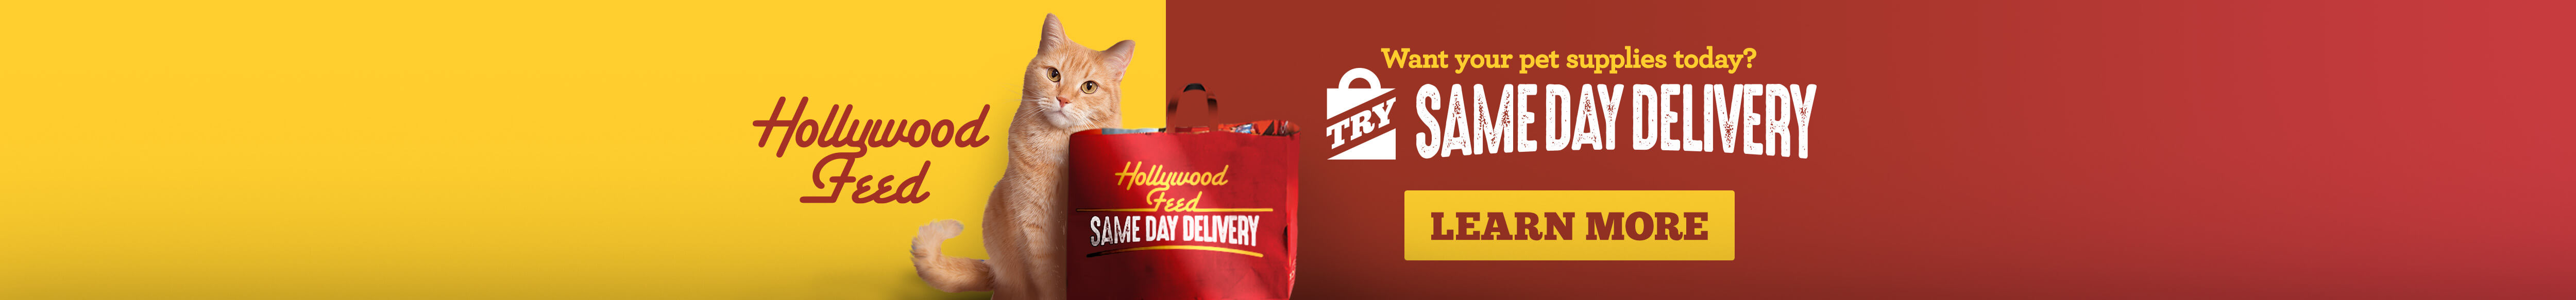 want your pet & cat supplies today? Try Hollywood Feed Same Day Delivery. Click to Learn More